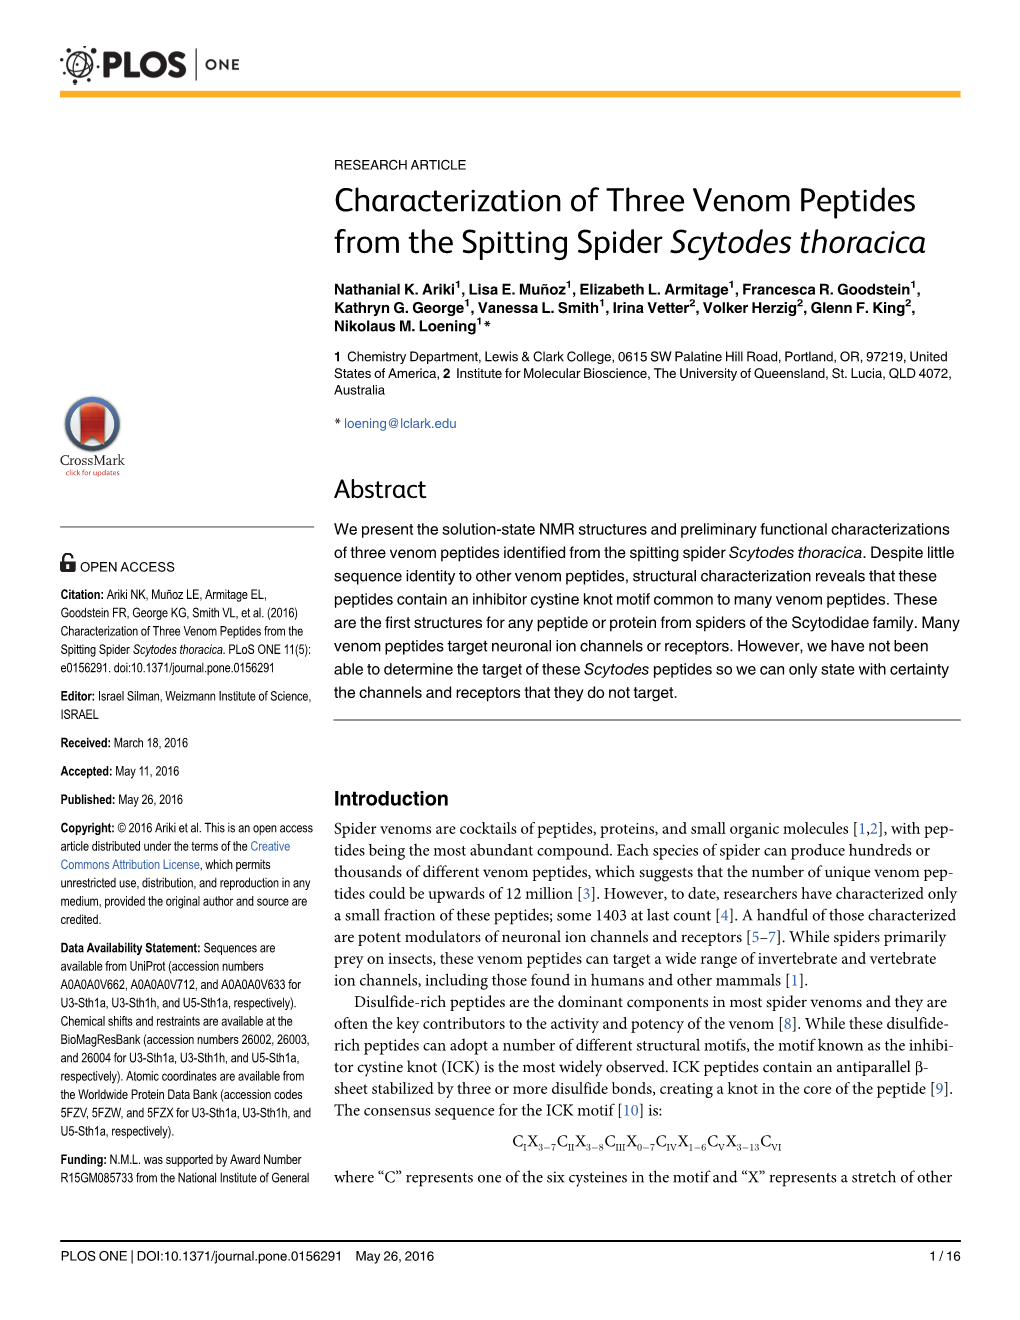 Characterization of Three Venom Peptides from the Spitting Spider Scytodes Thoracica